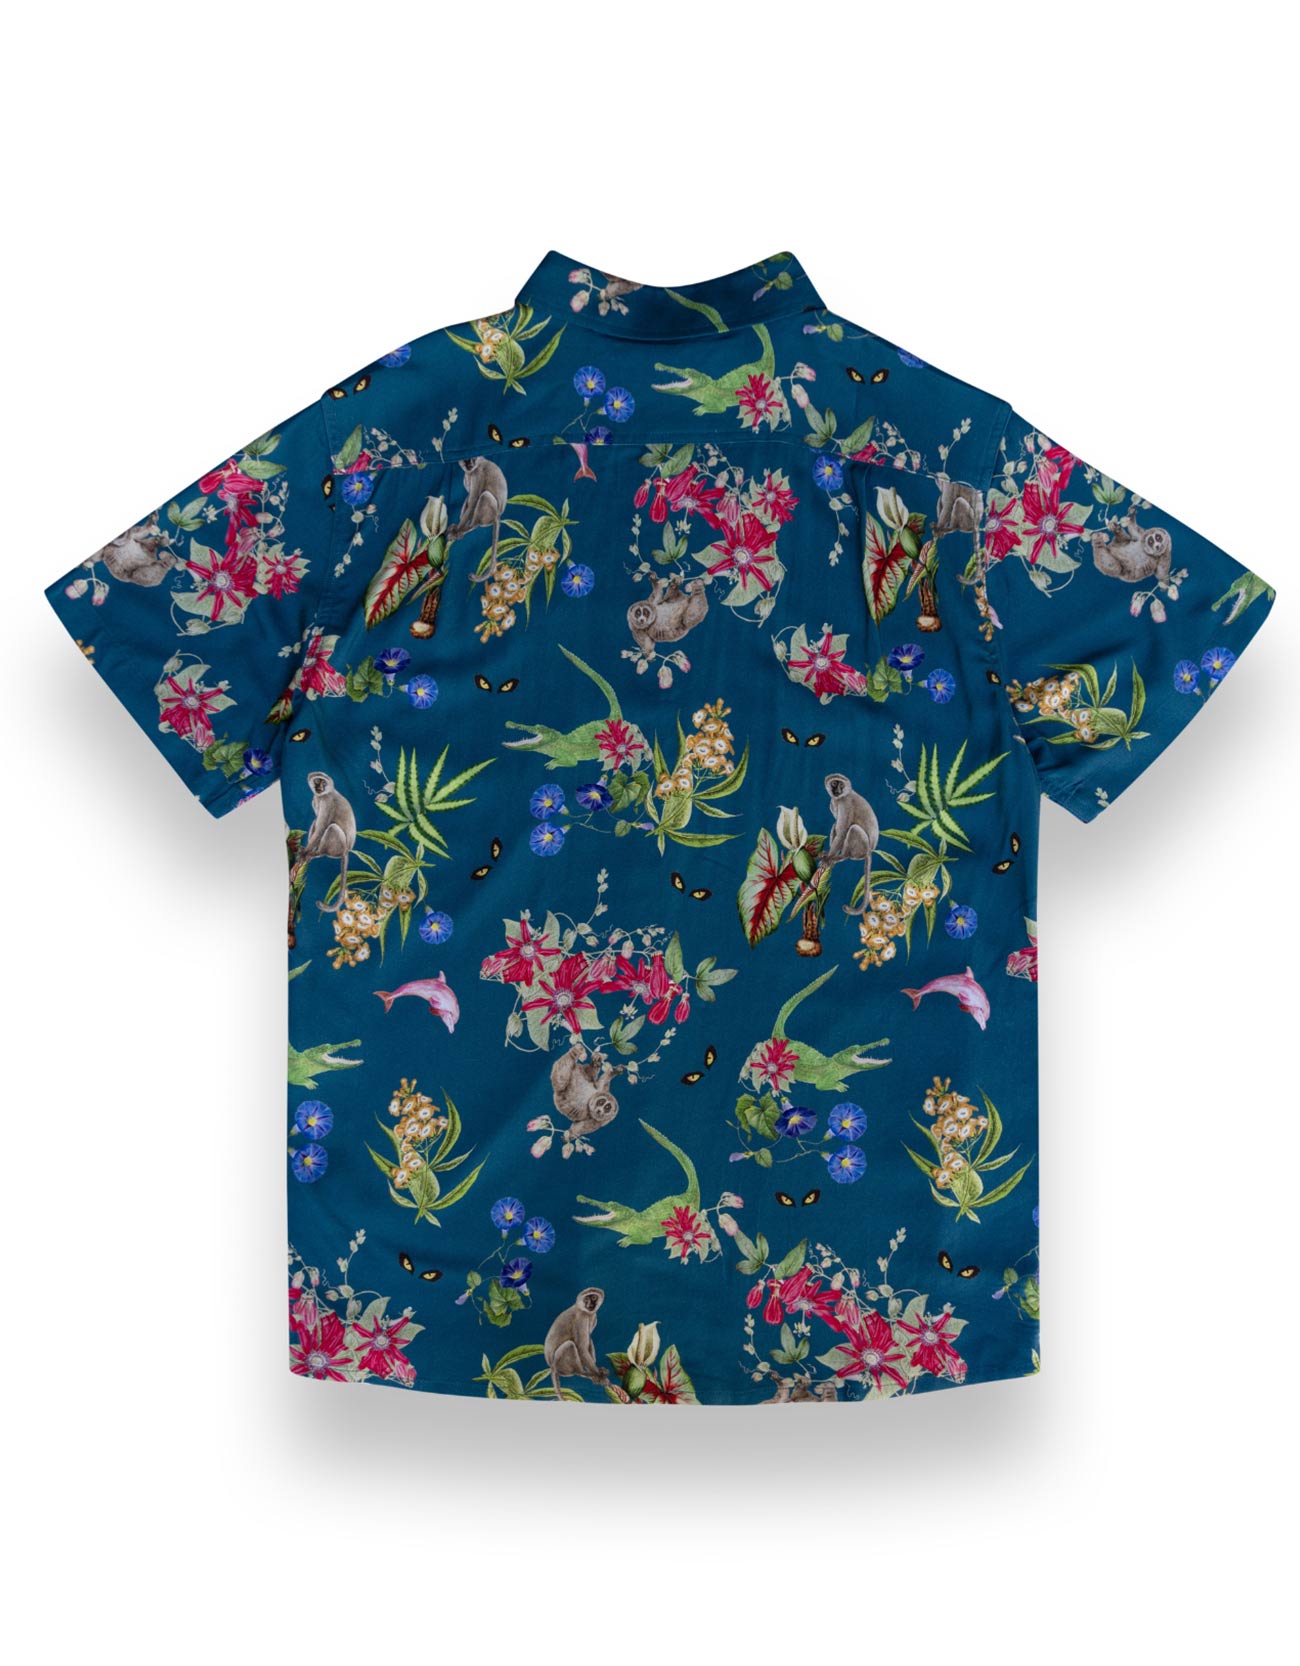 Navy button up with hand drawn pink dolphins, jungle animals and flowers print.